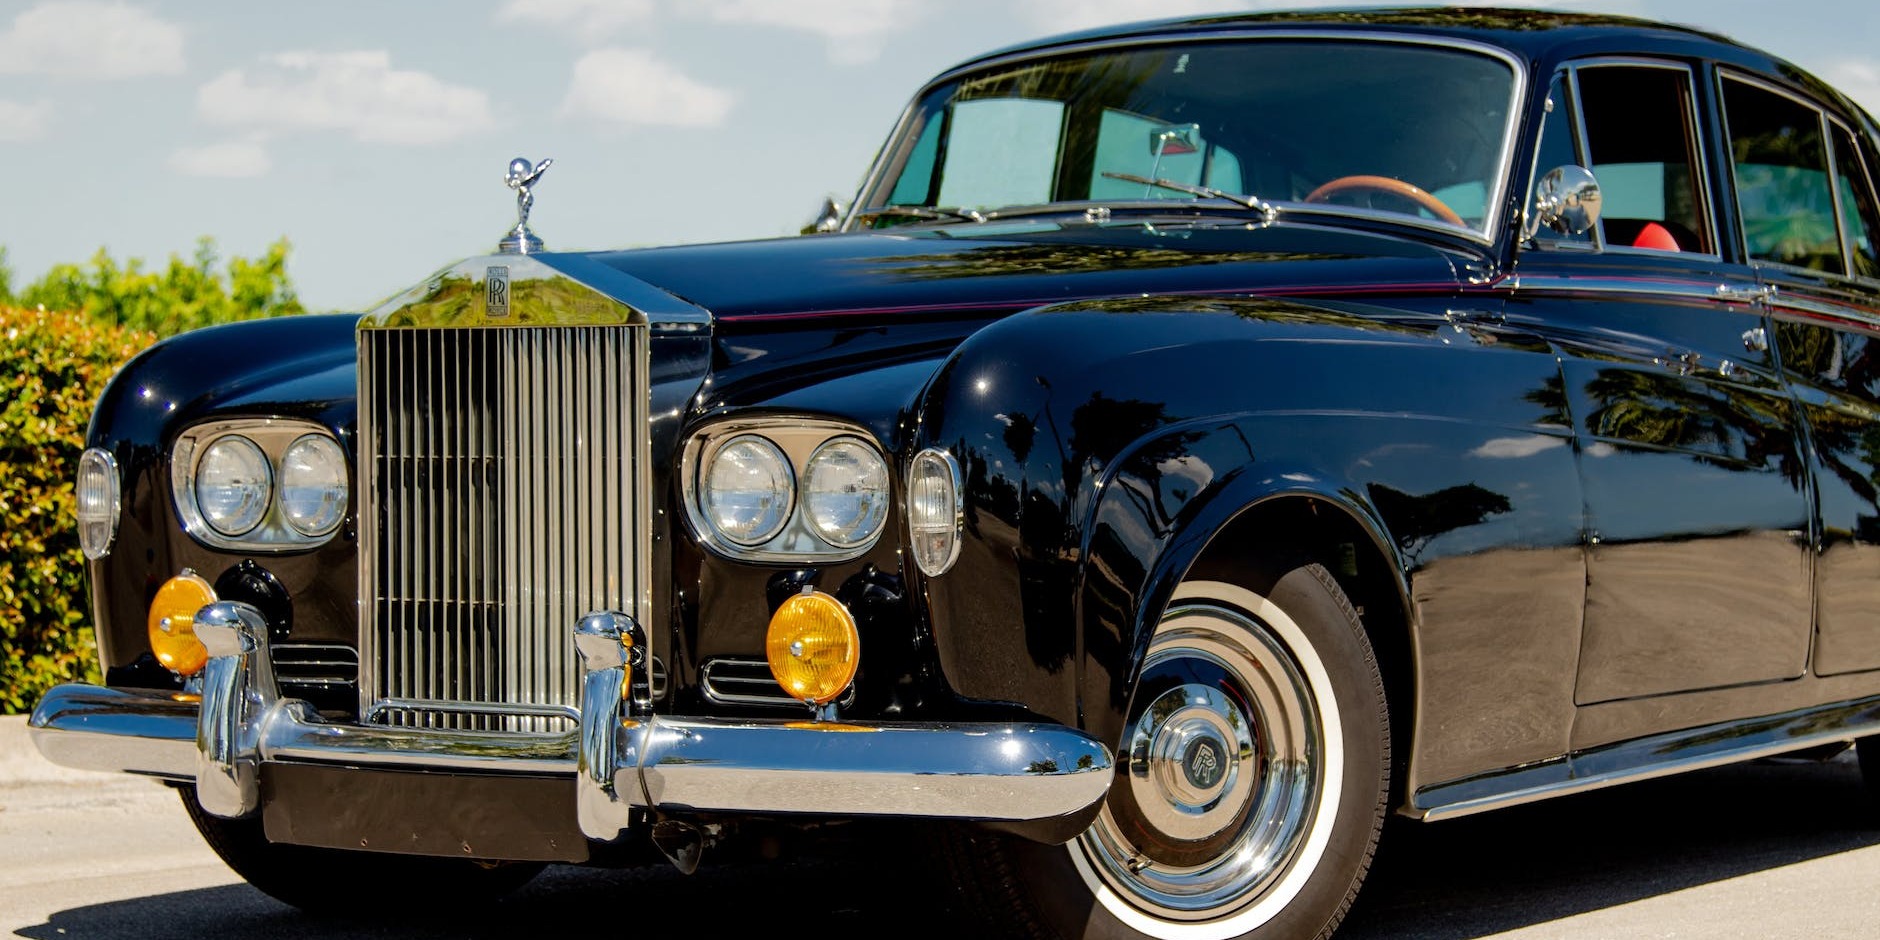 Top Tips for Hiring a Luxury Prom Car That Will Impress in the UK